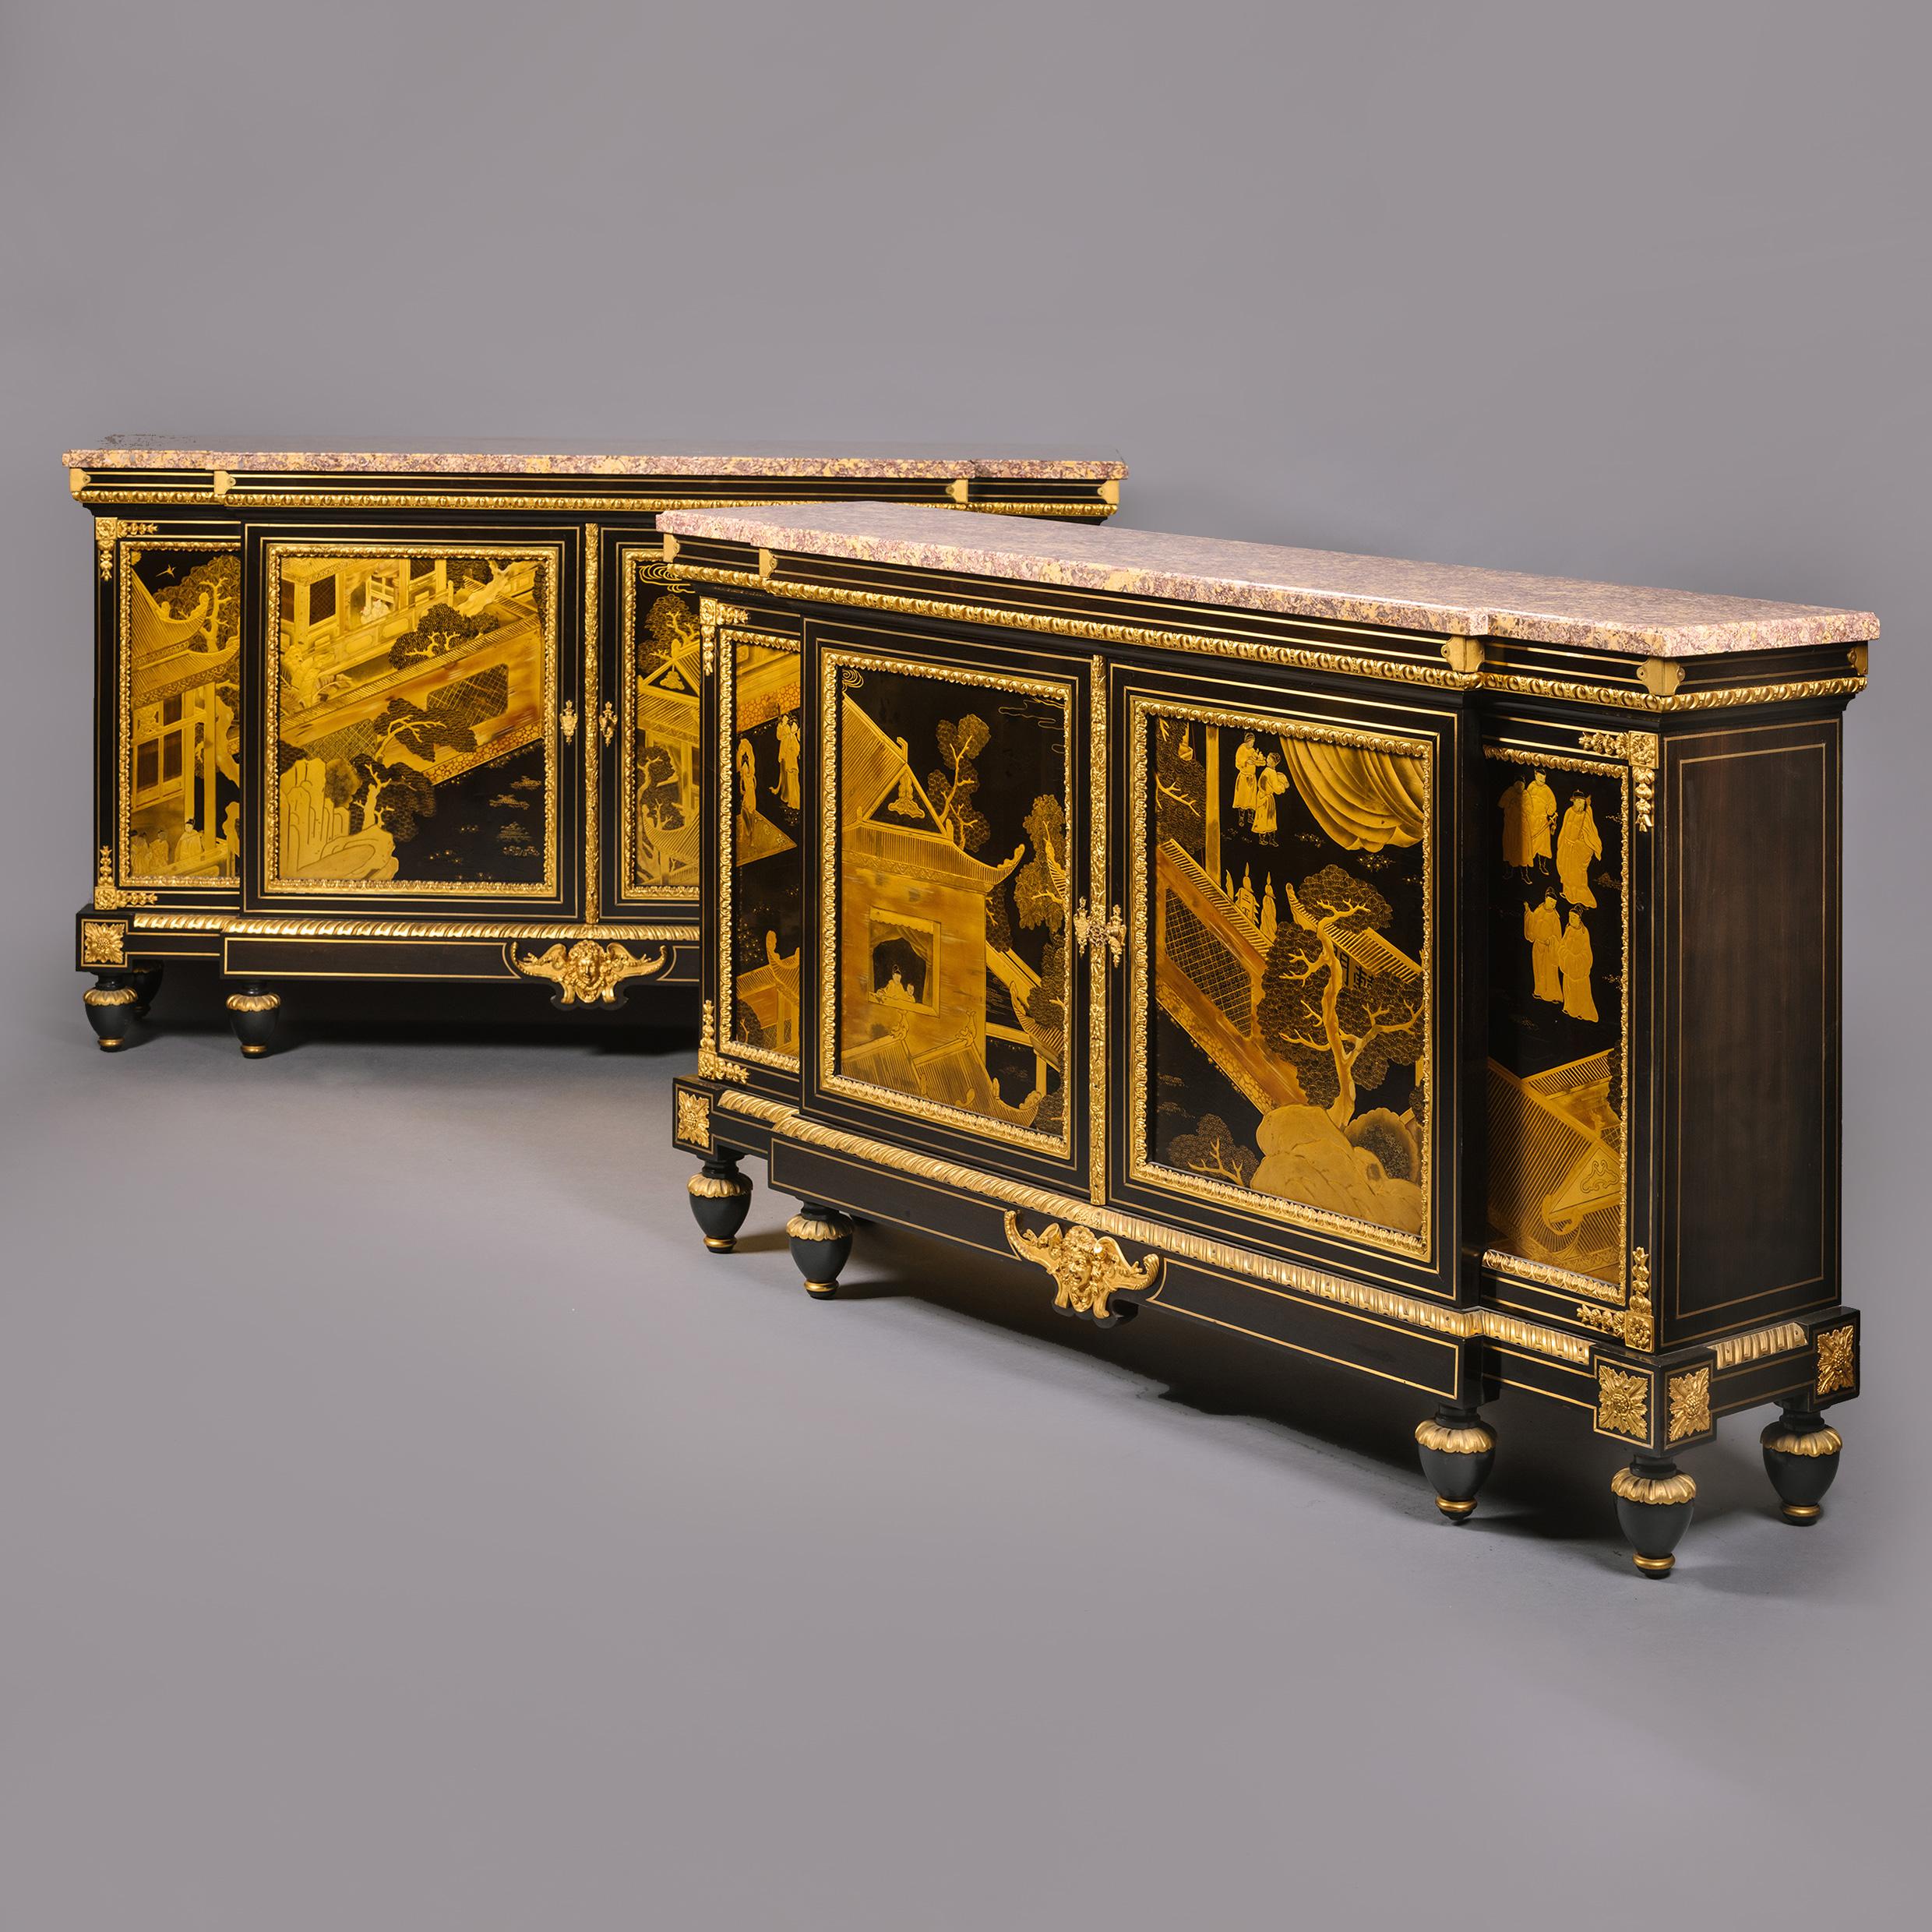 A Pair of Napoléon III Gilt-Bronze, Chinese Lacquer And Ebonised Side Cabinets
By Charles-Guillaume Winckelsen, Paris.

Signed 'Chles WINCKELSEN 21 Rue St Louis', Paris. 

Each with a top of the finest brocatelle jaune d’Espagne marble above a